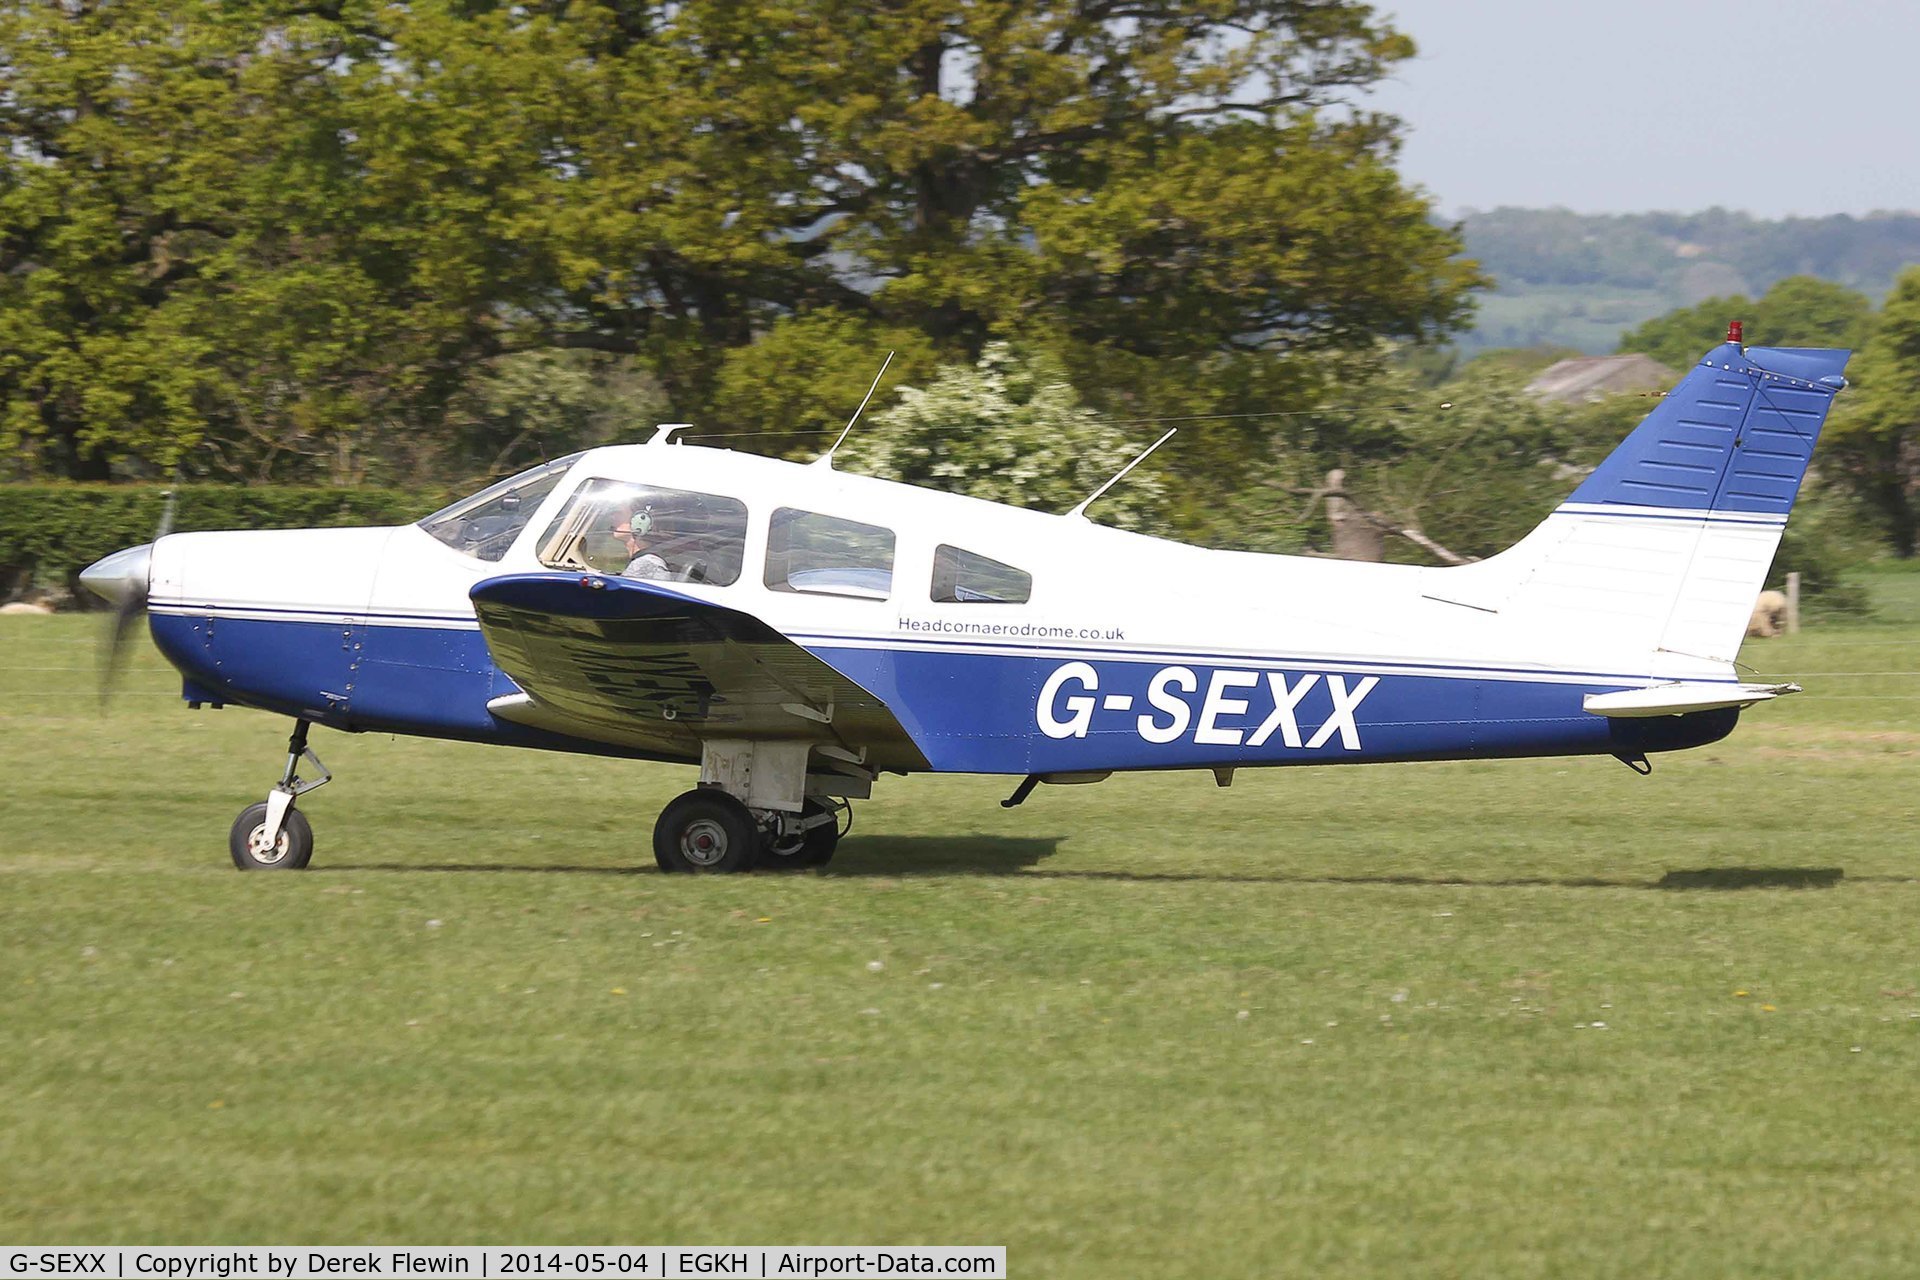 G-SEXX, 1978 Piper PA-28-161 Cherokee Warrior II C/N 28-7816196, Seen shortly after landing on runway 28 at EGKH.